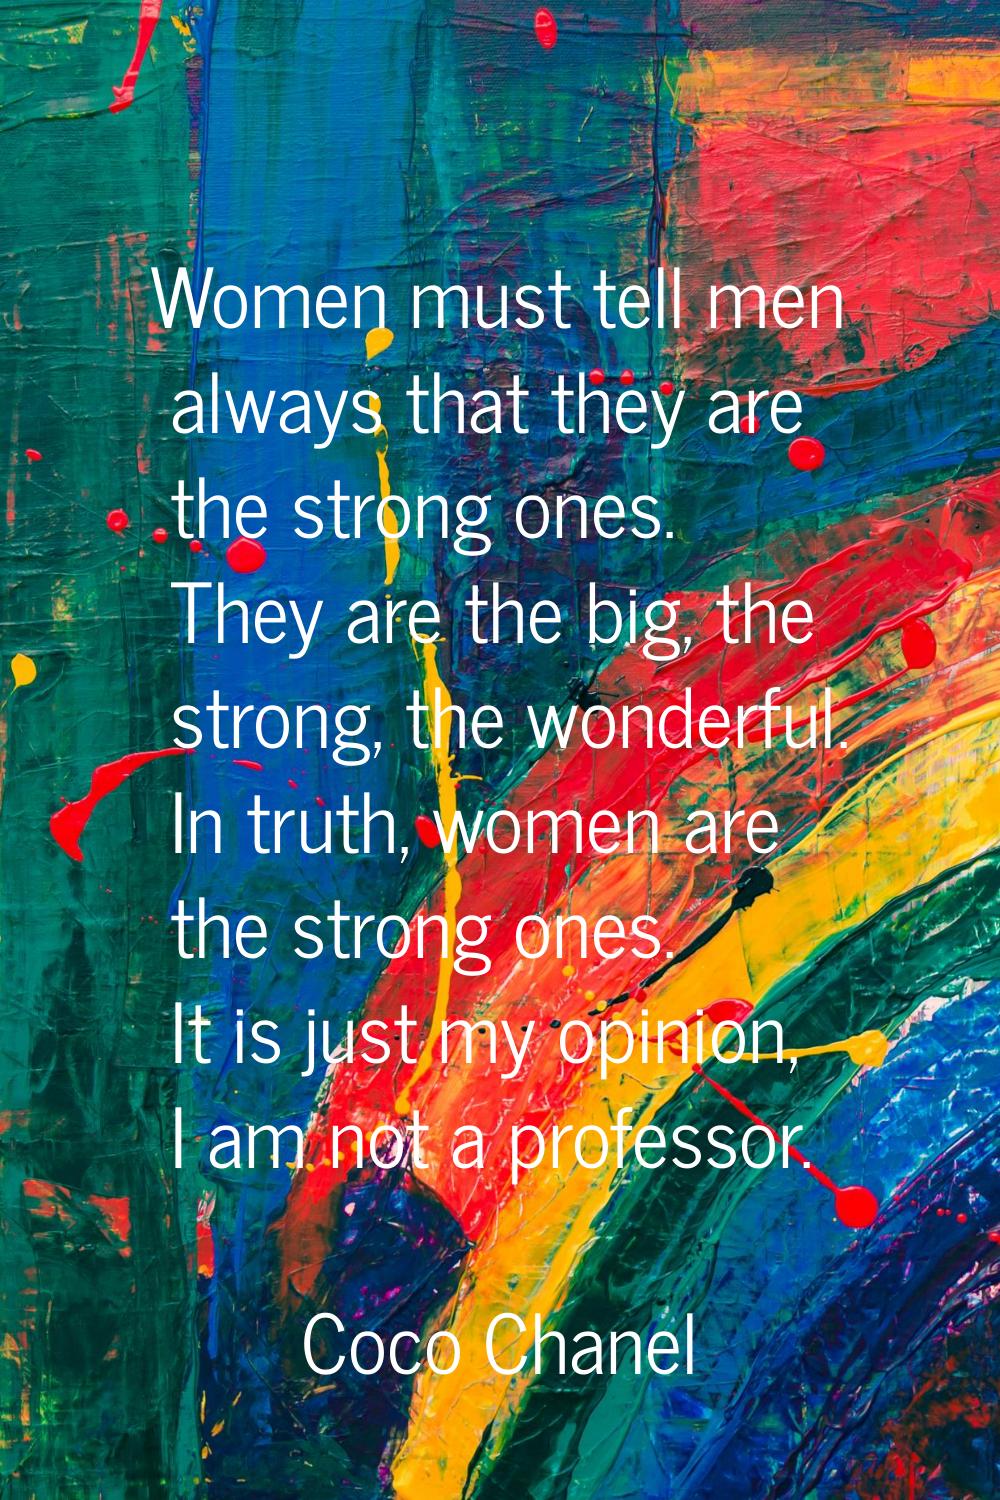 Women must tell men always that they are the strong ones. They are the big, the strong, the wonderf